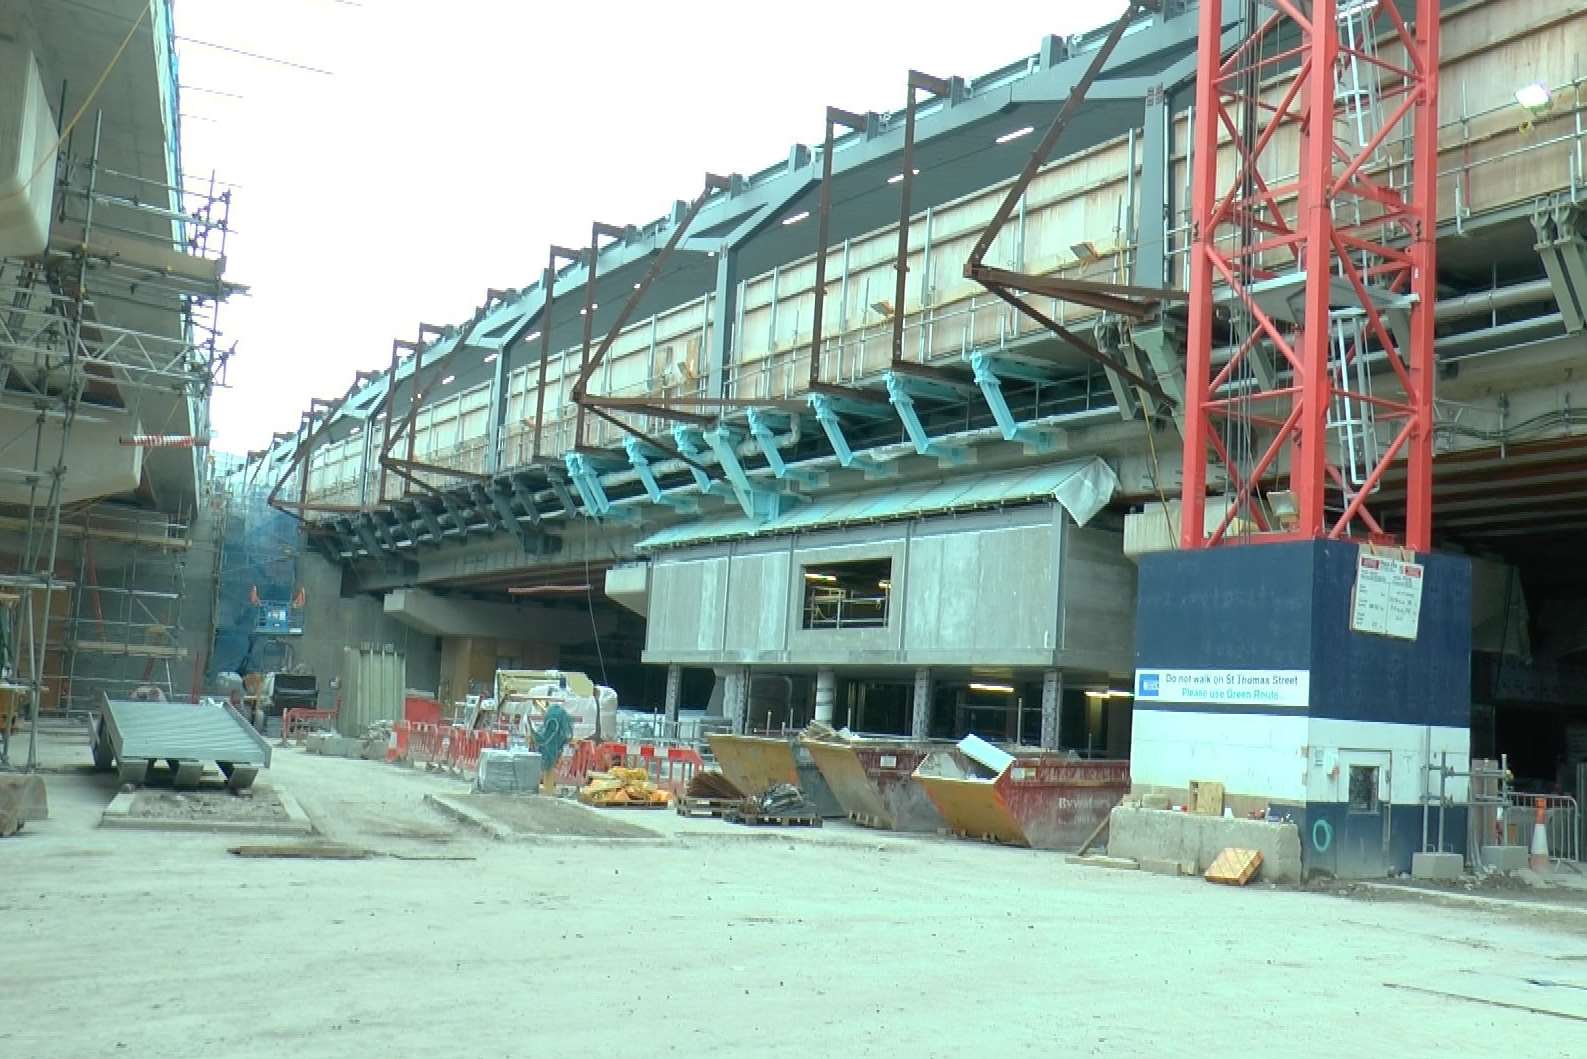 Part of the new concourse with a platform overhead